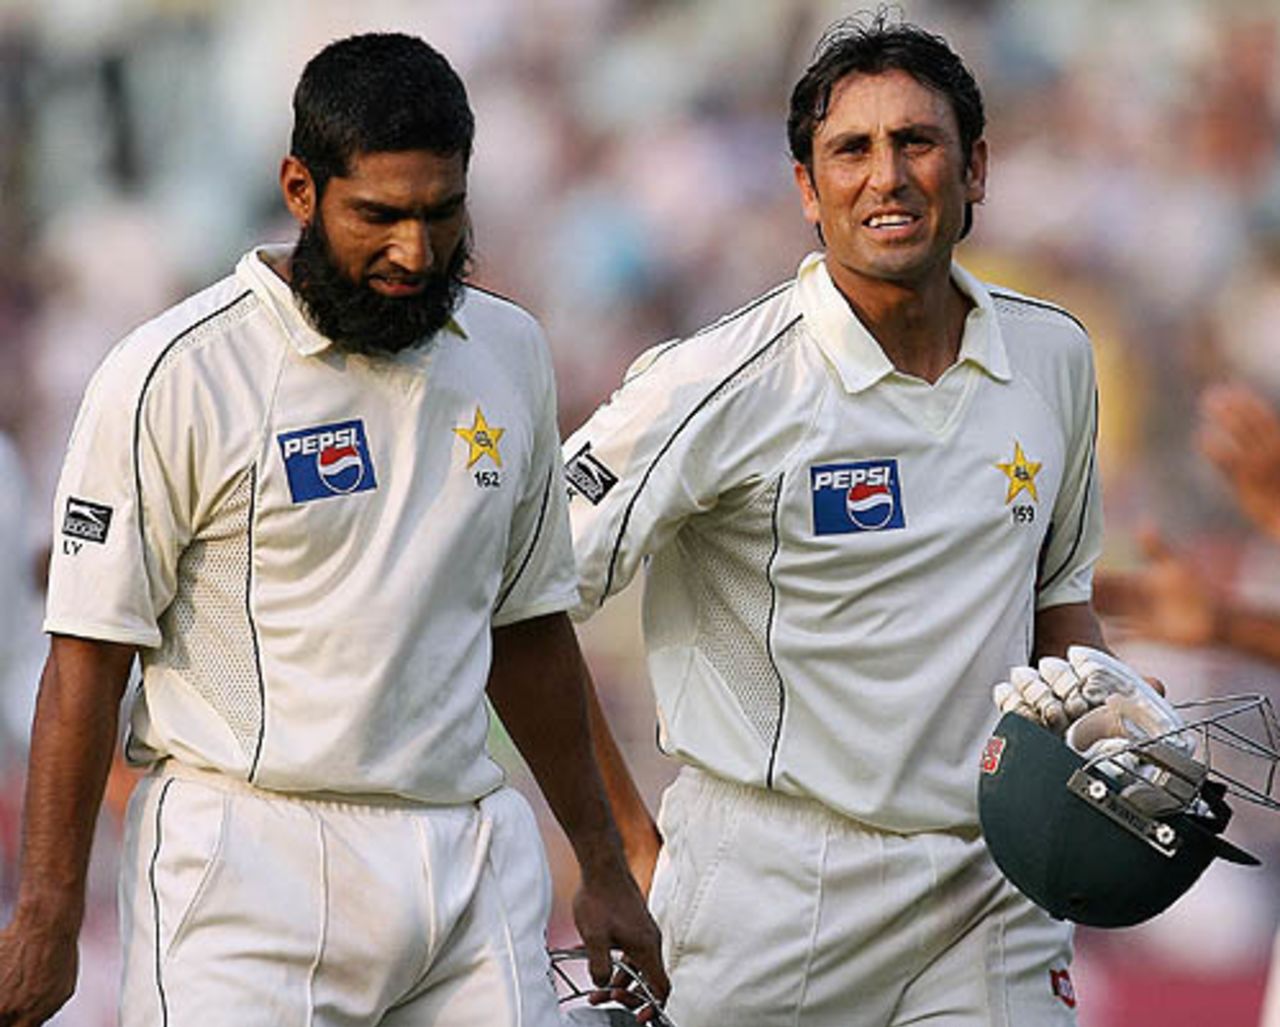 Mohammad Yousuf and Younis Khan walk off the field after the match ended in a draw, India v Pakistan, 2nd Test, Kolkata, 5th day, December 4, 2007